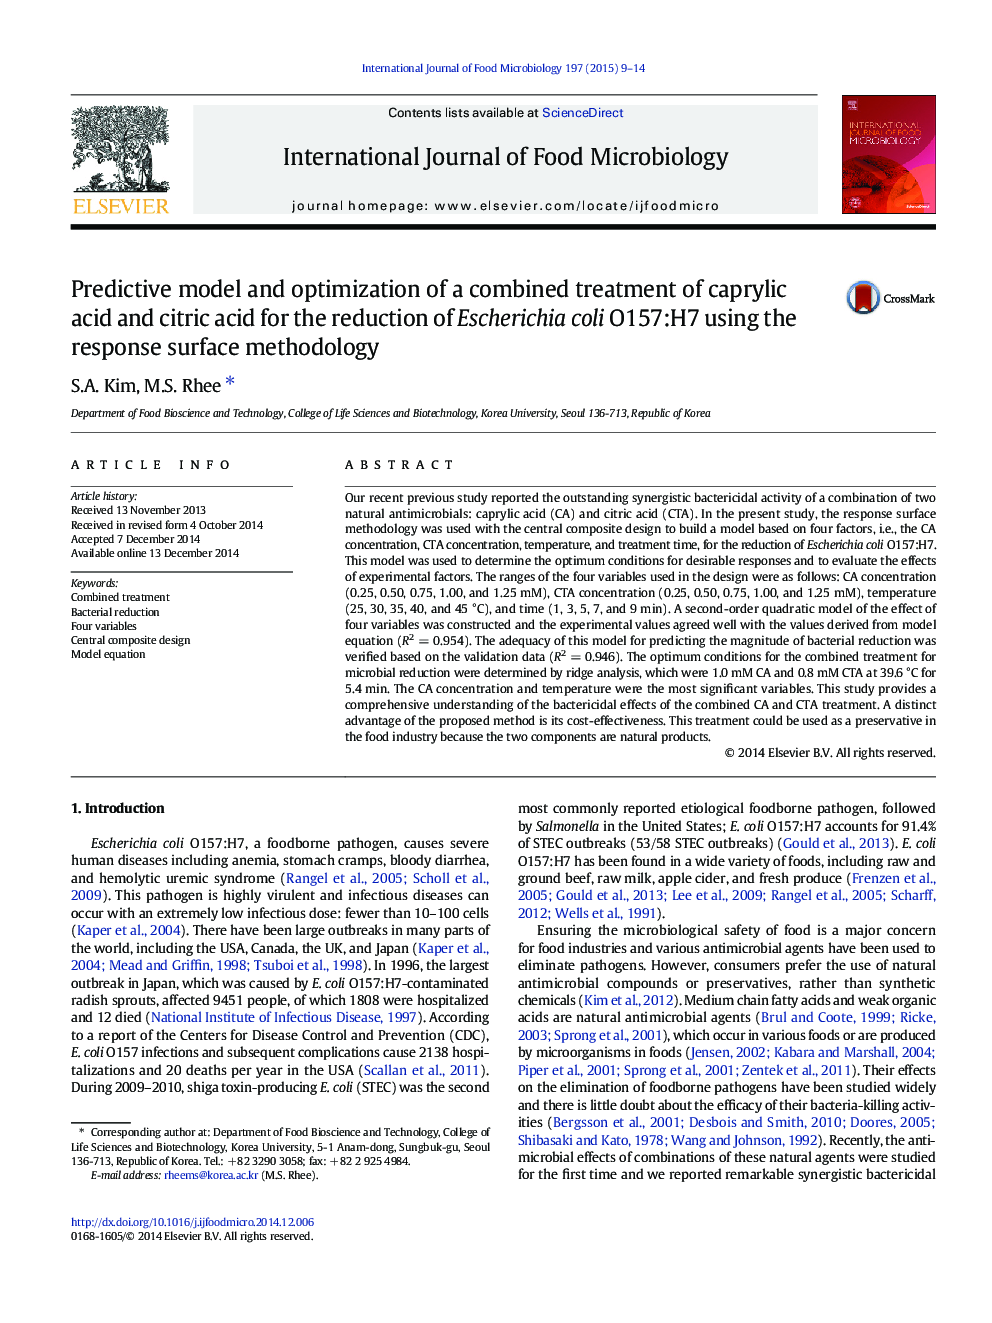 Predictive model and optimization of a combined treatment of caprylic acid and citric acid for the reduction of Escherichia coli O157:H7 using the response surface methodology